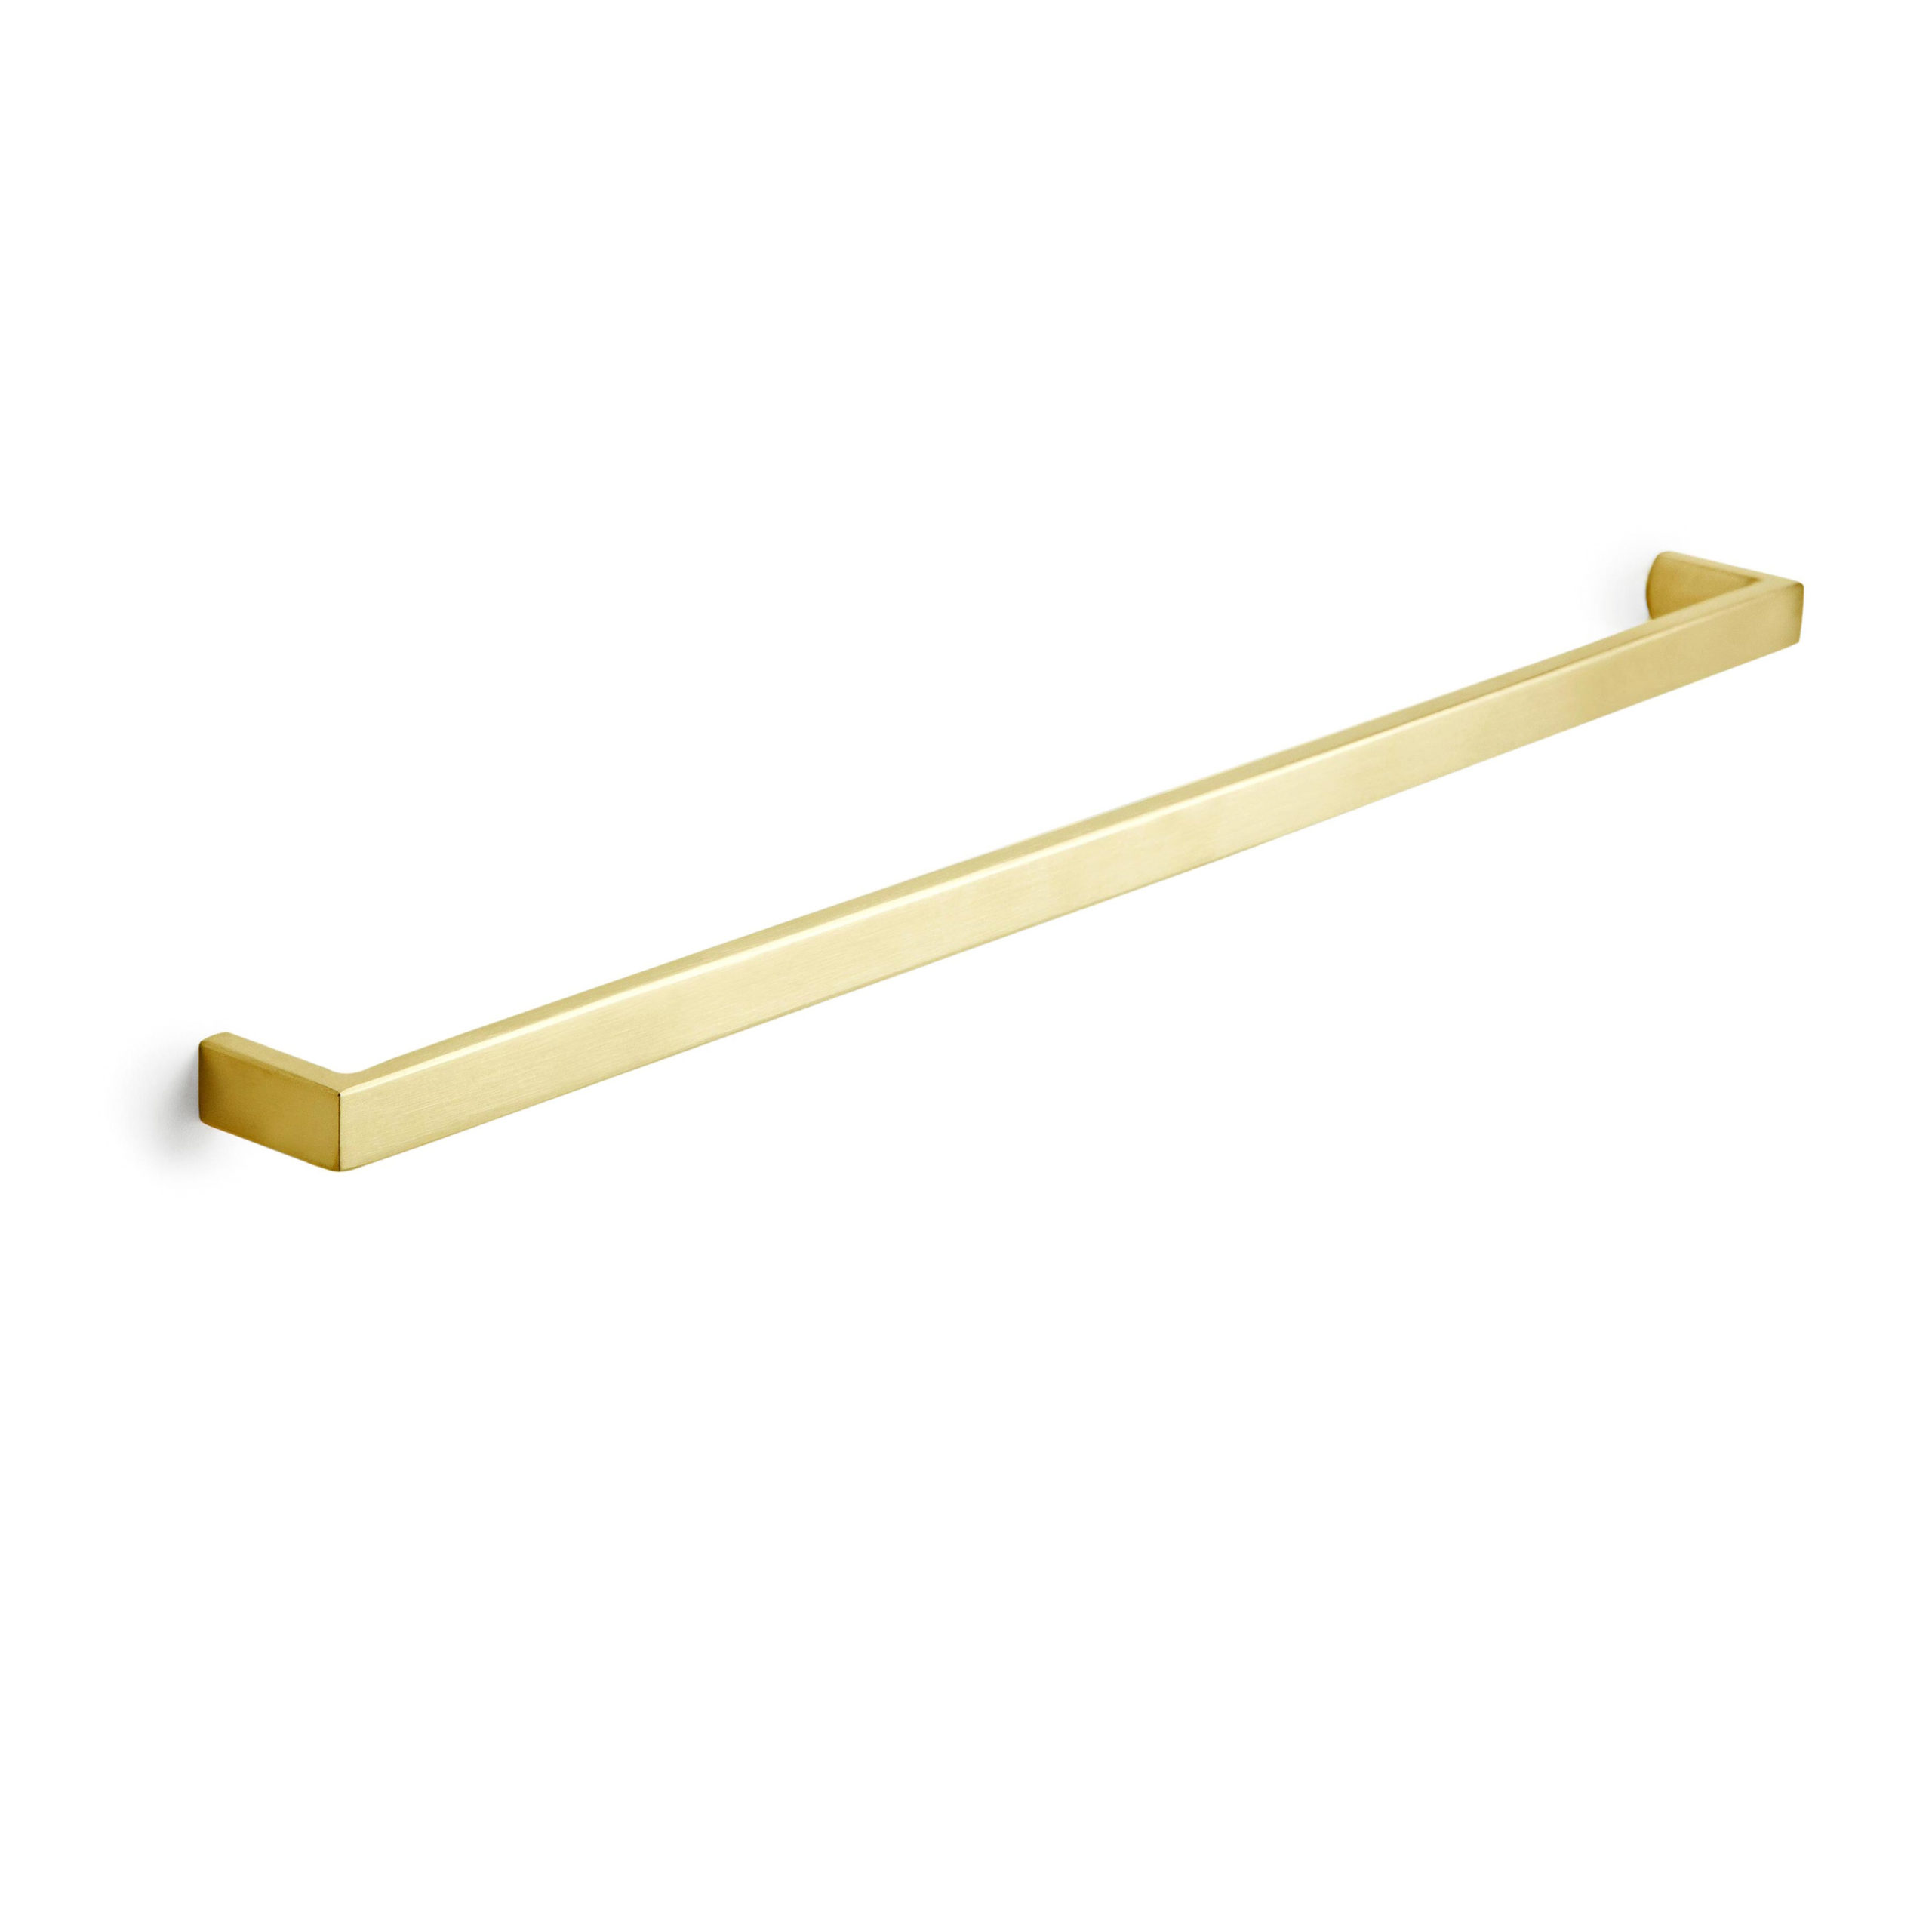 Satin brass modern cabinet door pull - product featured image - 12.5 inch 320 mm length - product SKU I 204 SBZ